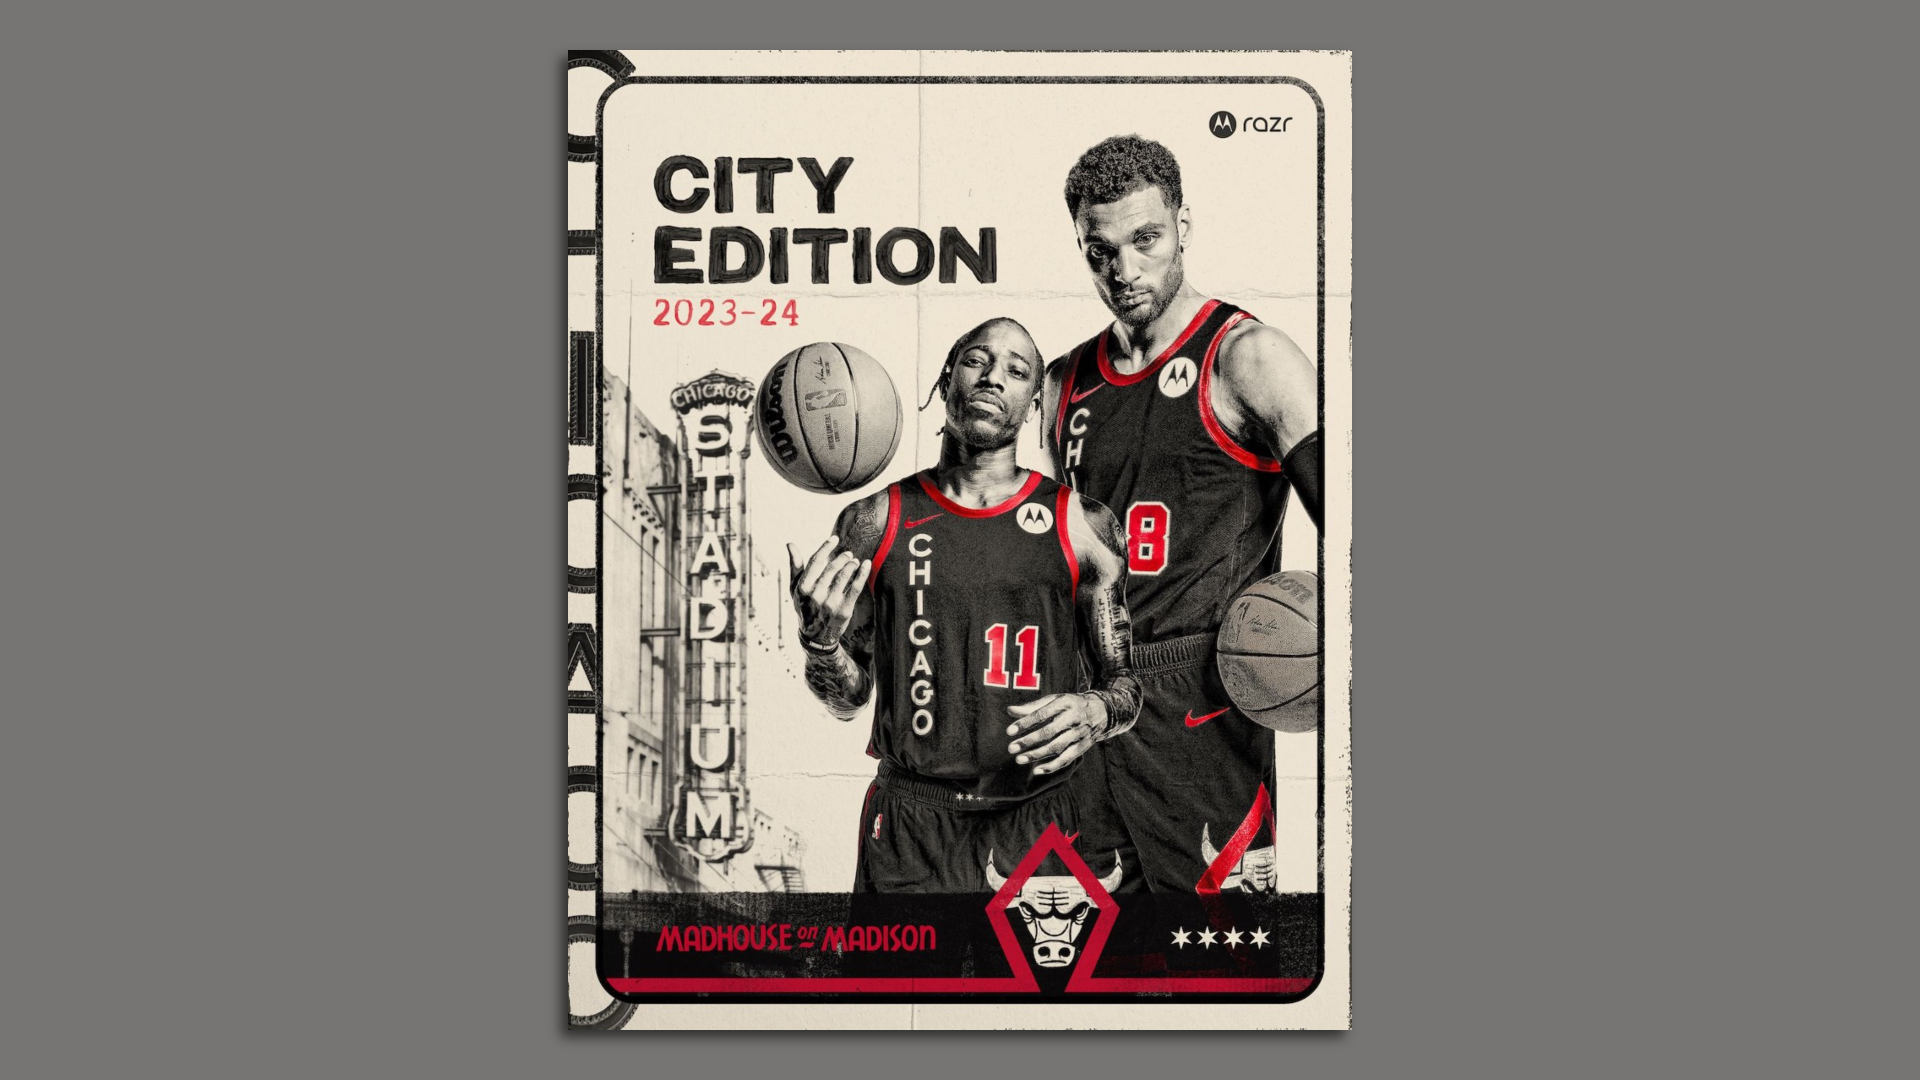 A photo of two Bulls players holding basketballs on an illustrated sports card that says "City Edition 2023-2024"